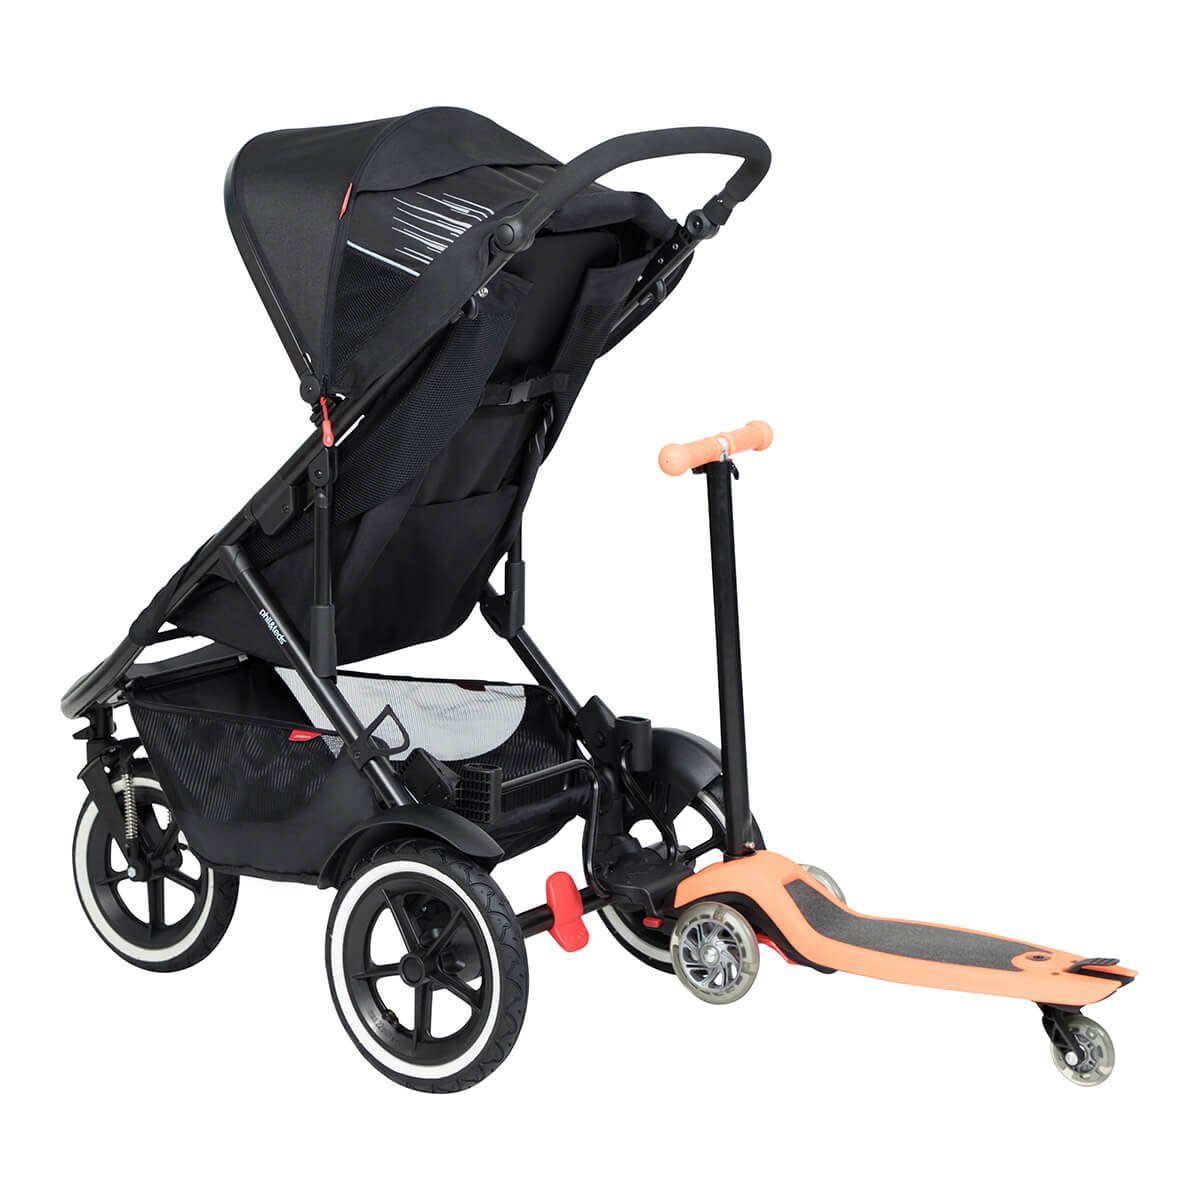 https://cdn.accentuate.io/7508551401650/19437753860274/philteds-sport-buggy-with-freerider-stroller-board-in-rear-v1667174394096.jpg?1200x1200